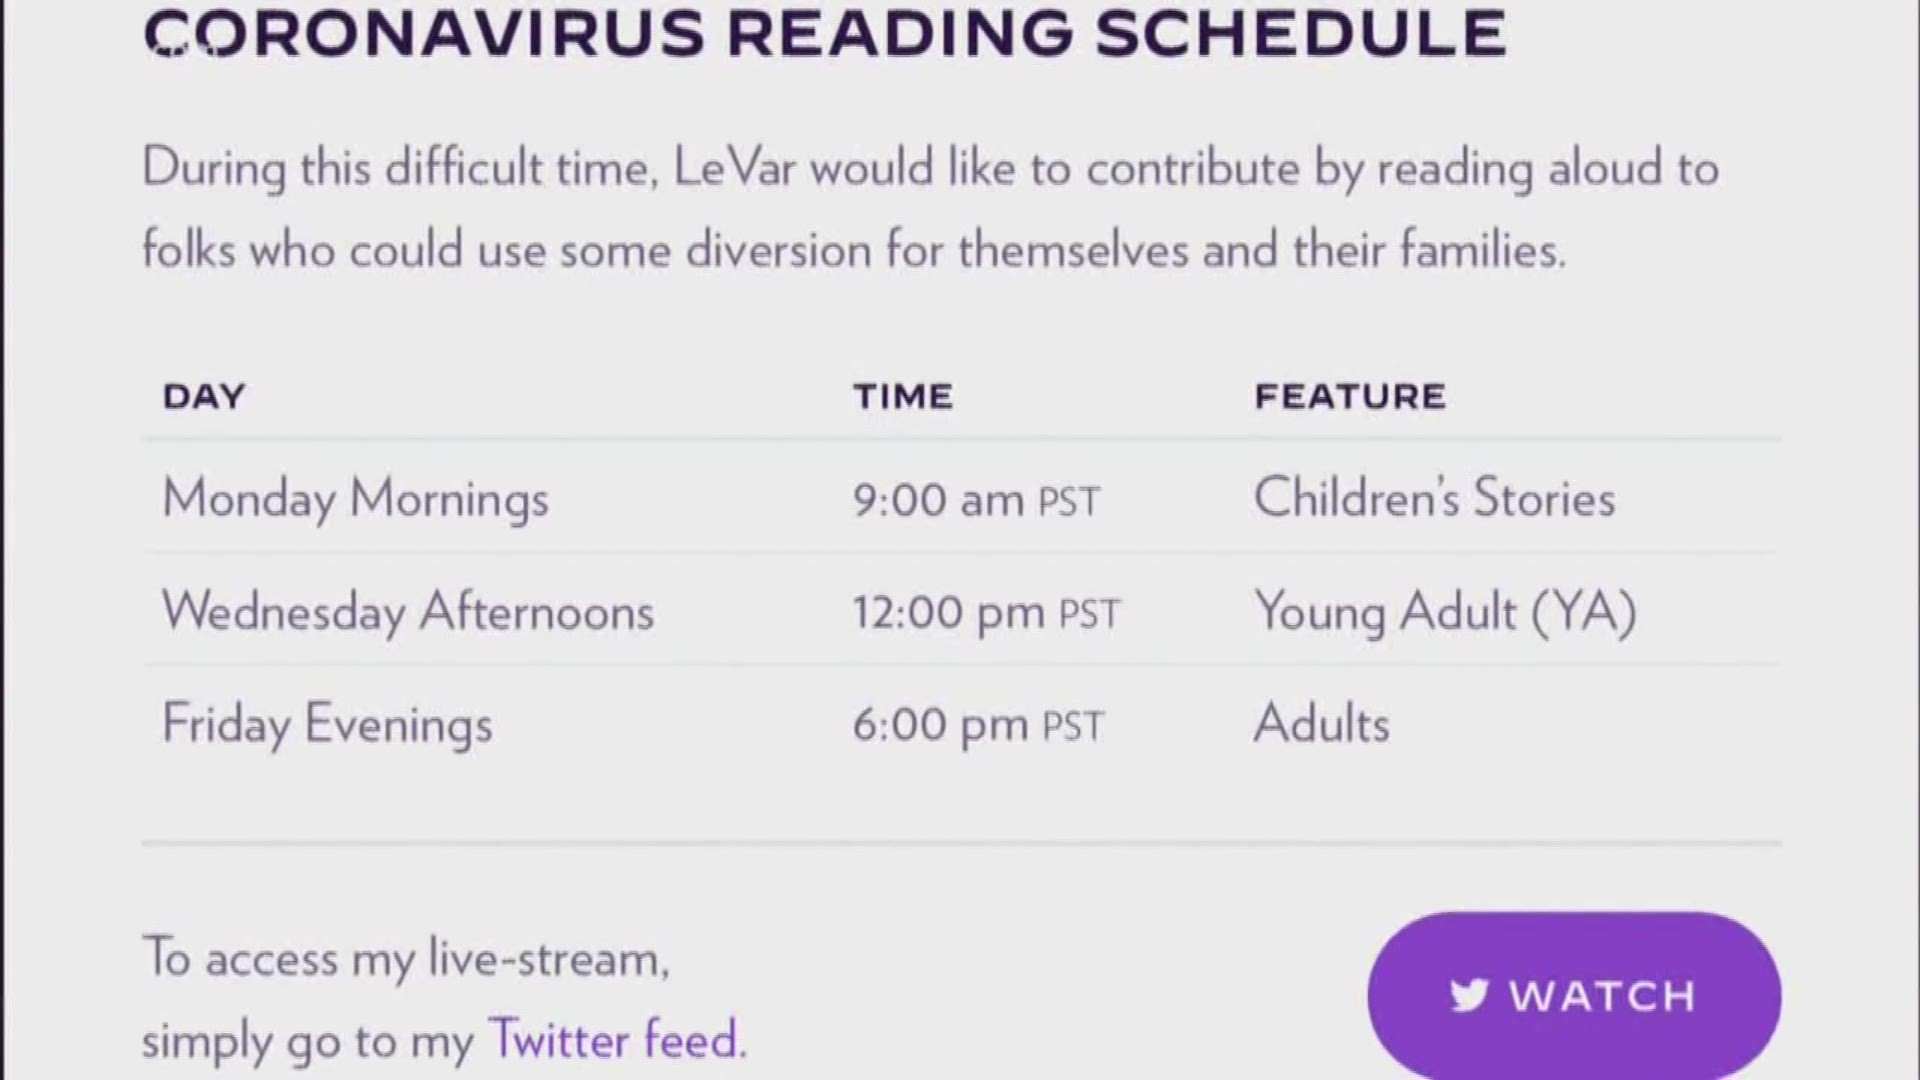 Amid the coronavirus, celebrities are reading to kids over the internet. Becky Ditchfield explains how you can join LeVar Burton for storytime.